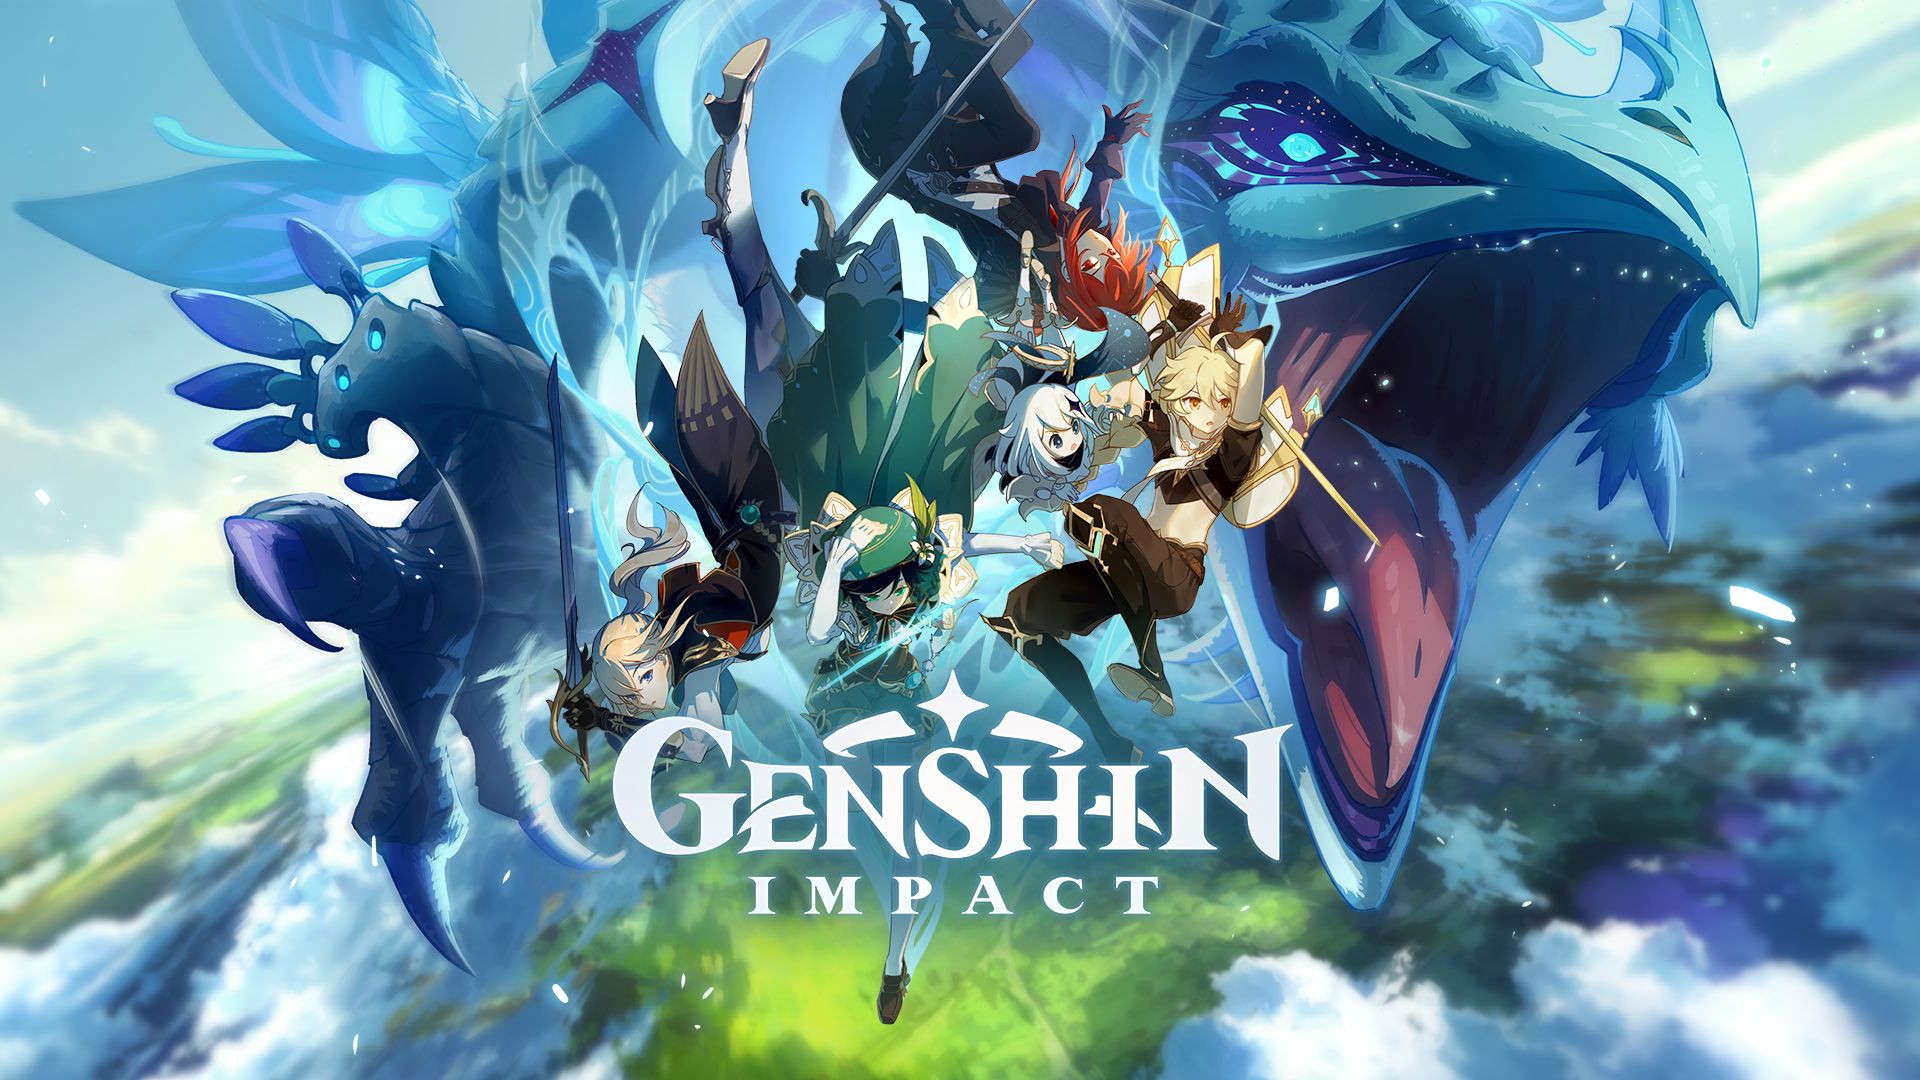 Genshin Impact Launches September 28th on PC, Android